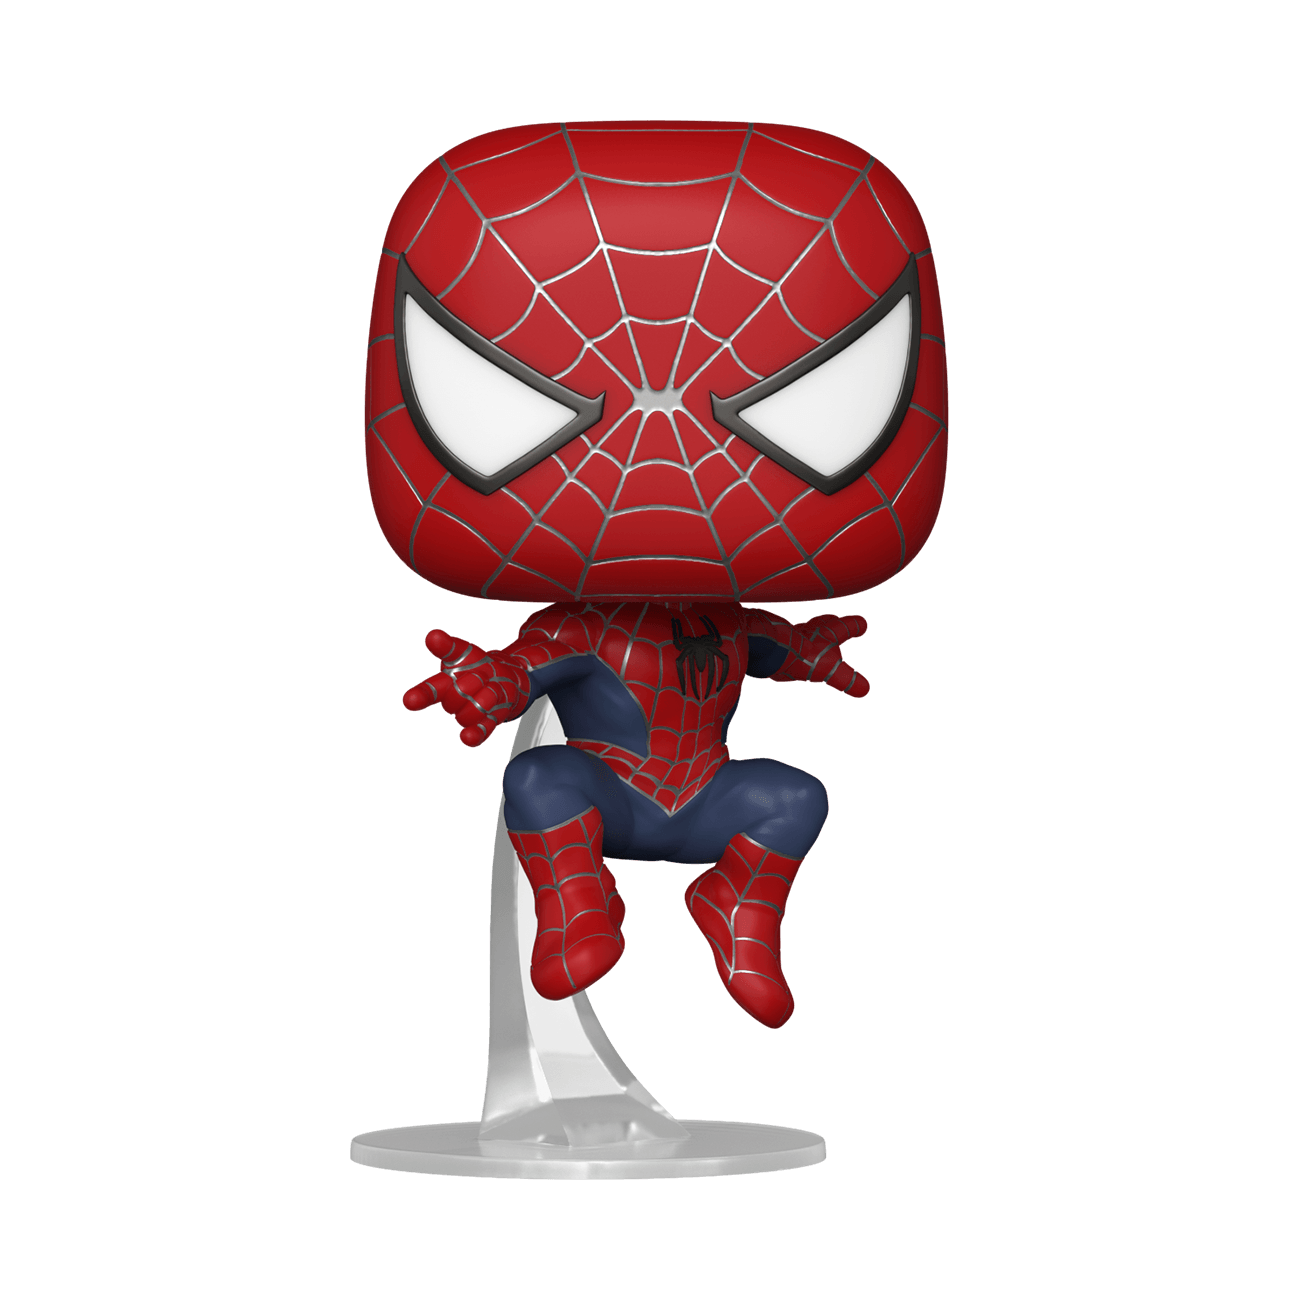 Funko Pop Friendly Neighborhood Spider-Man - Spider-Man: No Way Home - BumbleToys - 18+, Action Figures, Avengers, Boys, Characters, Funko, Pre-Order, Spider man, Spiderman